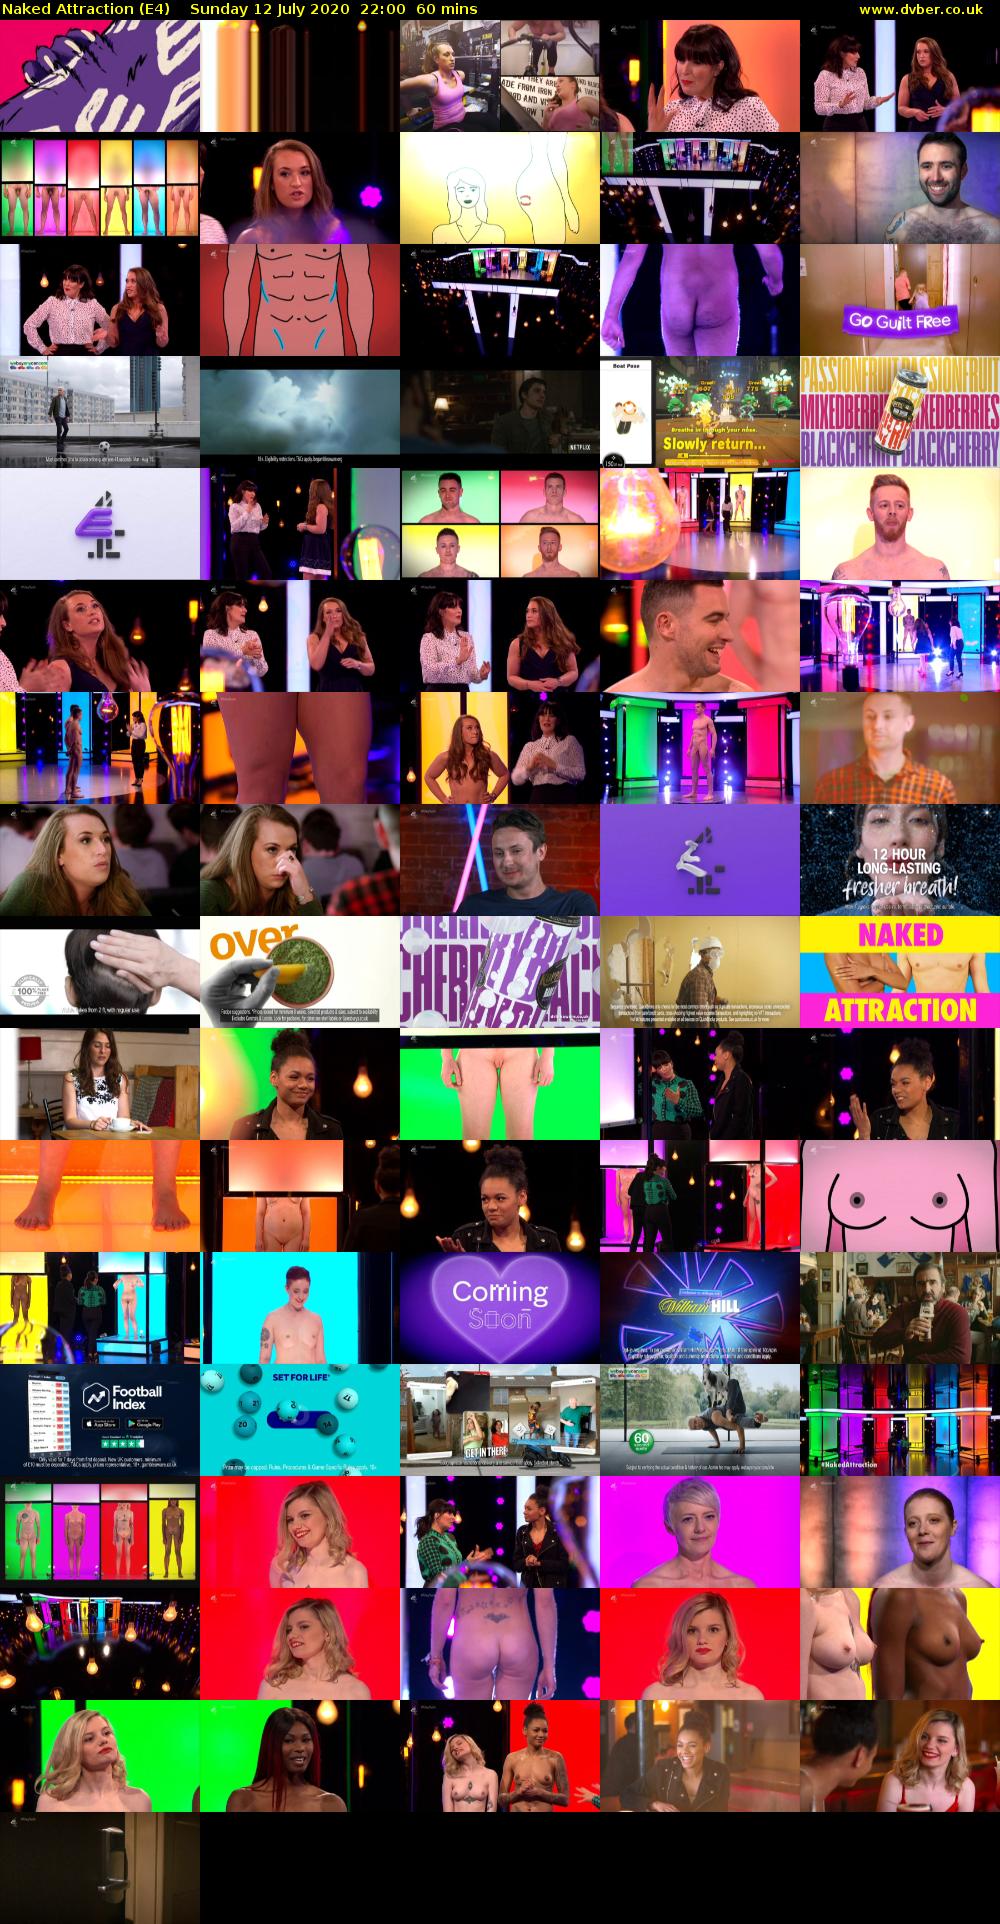 Naked Attraction (E4) Sunday 12 July 2020 22:00 - 23:00